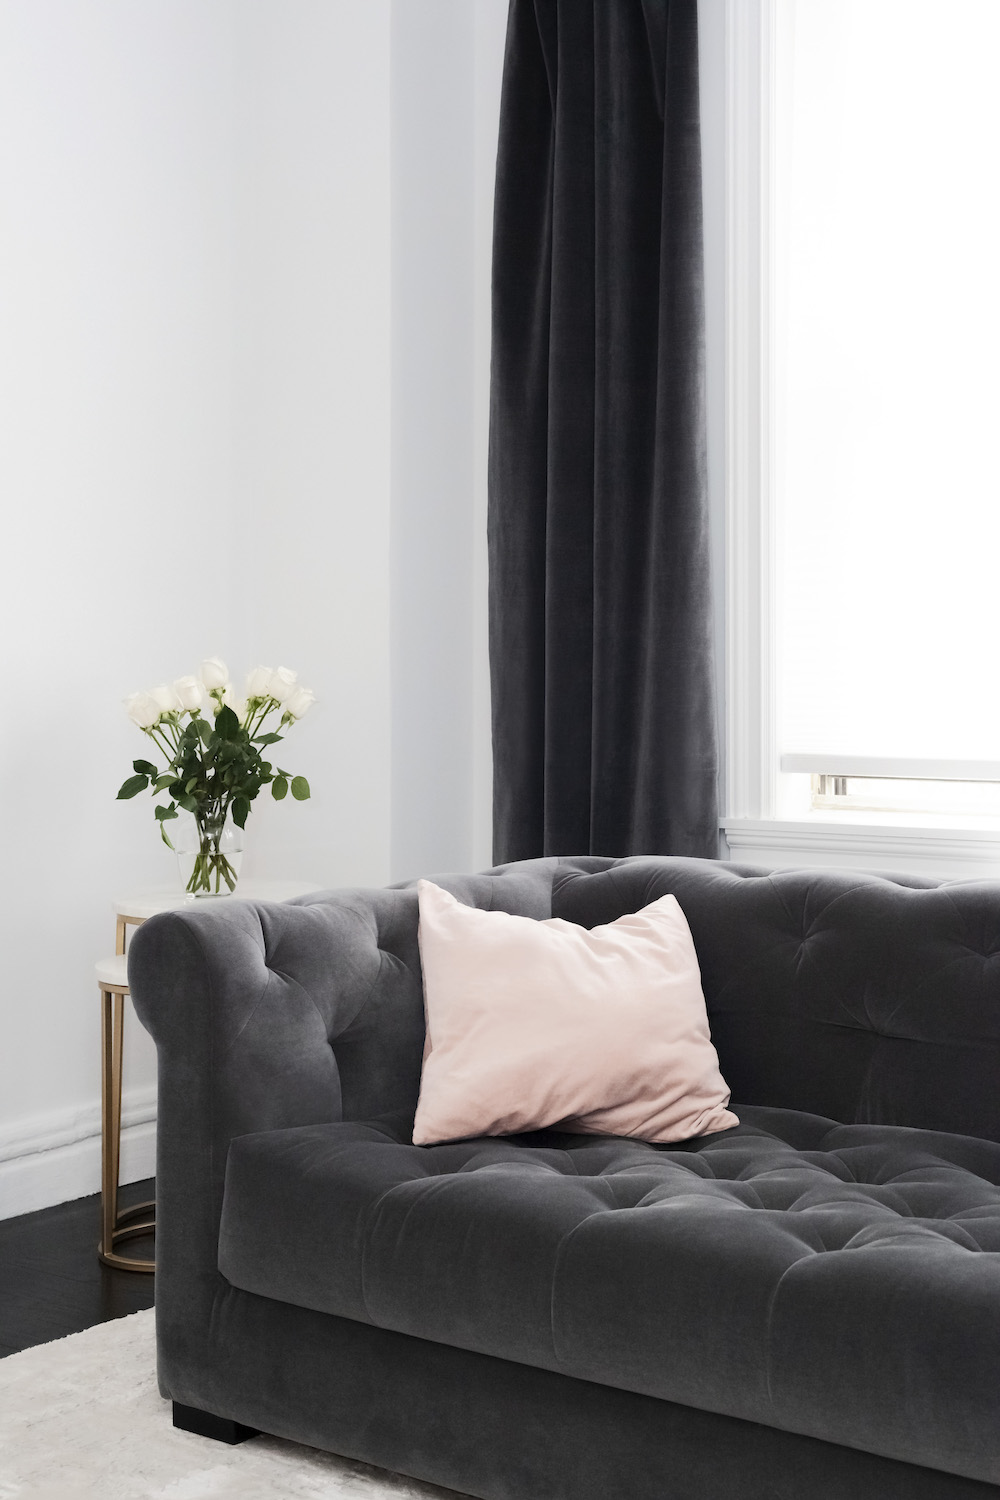 Gray velvet couch and curtains